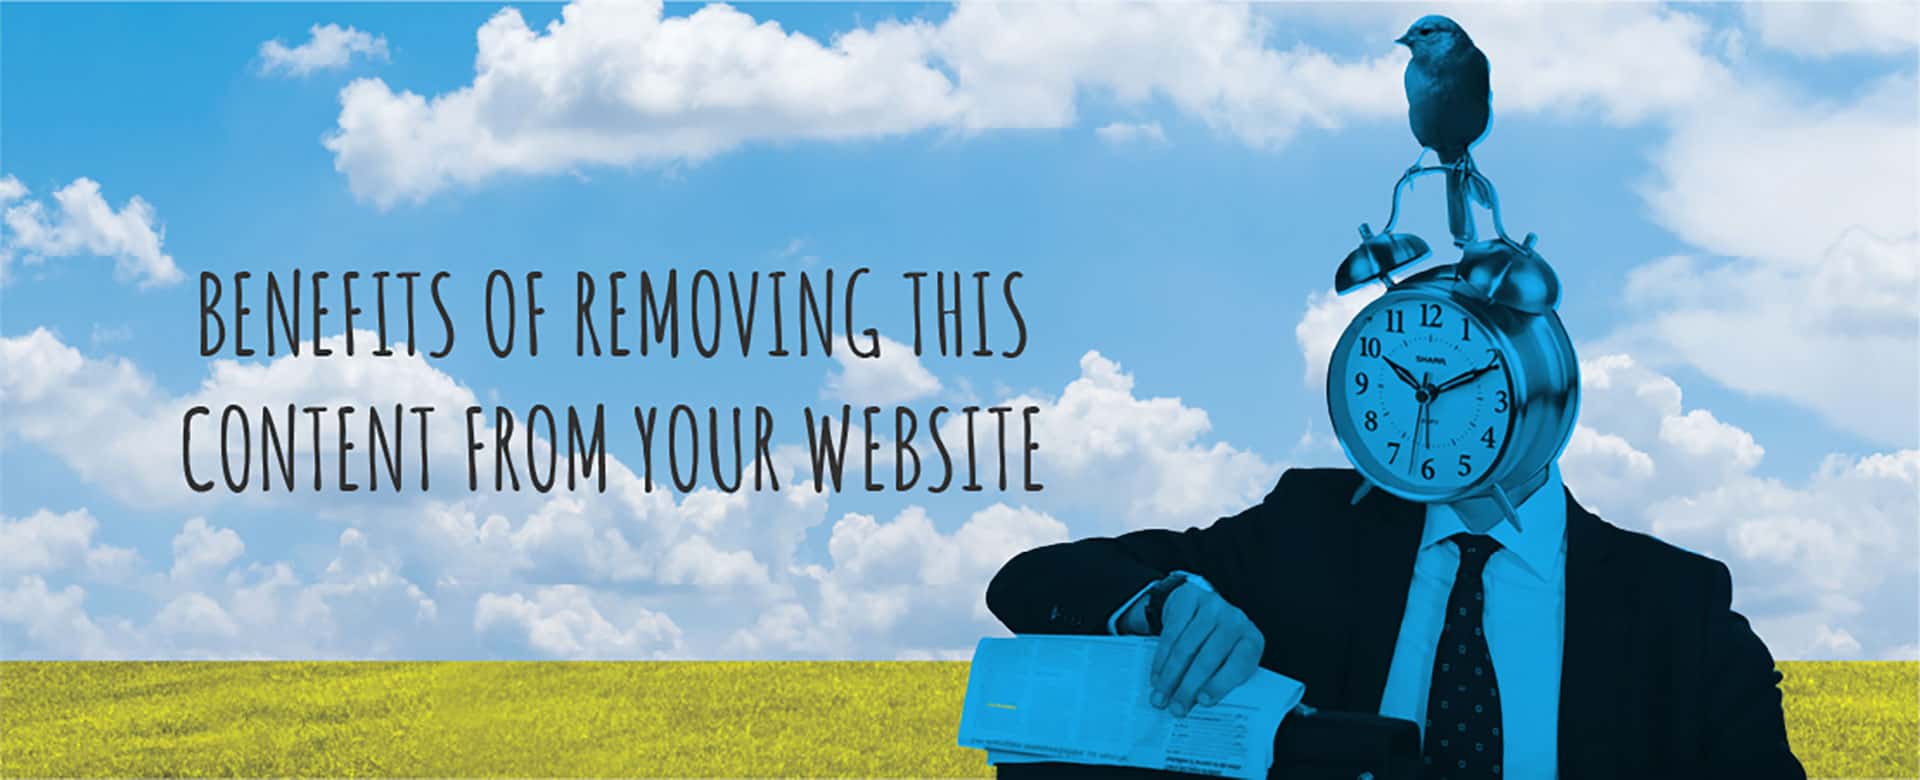 Benefits of Removing This Content From Your Website